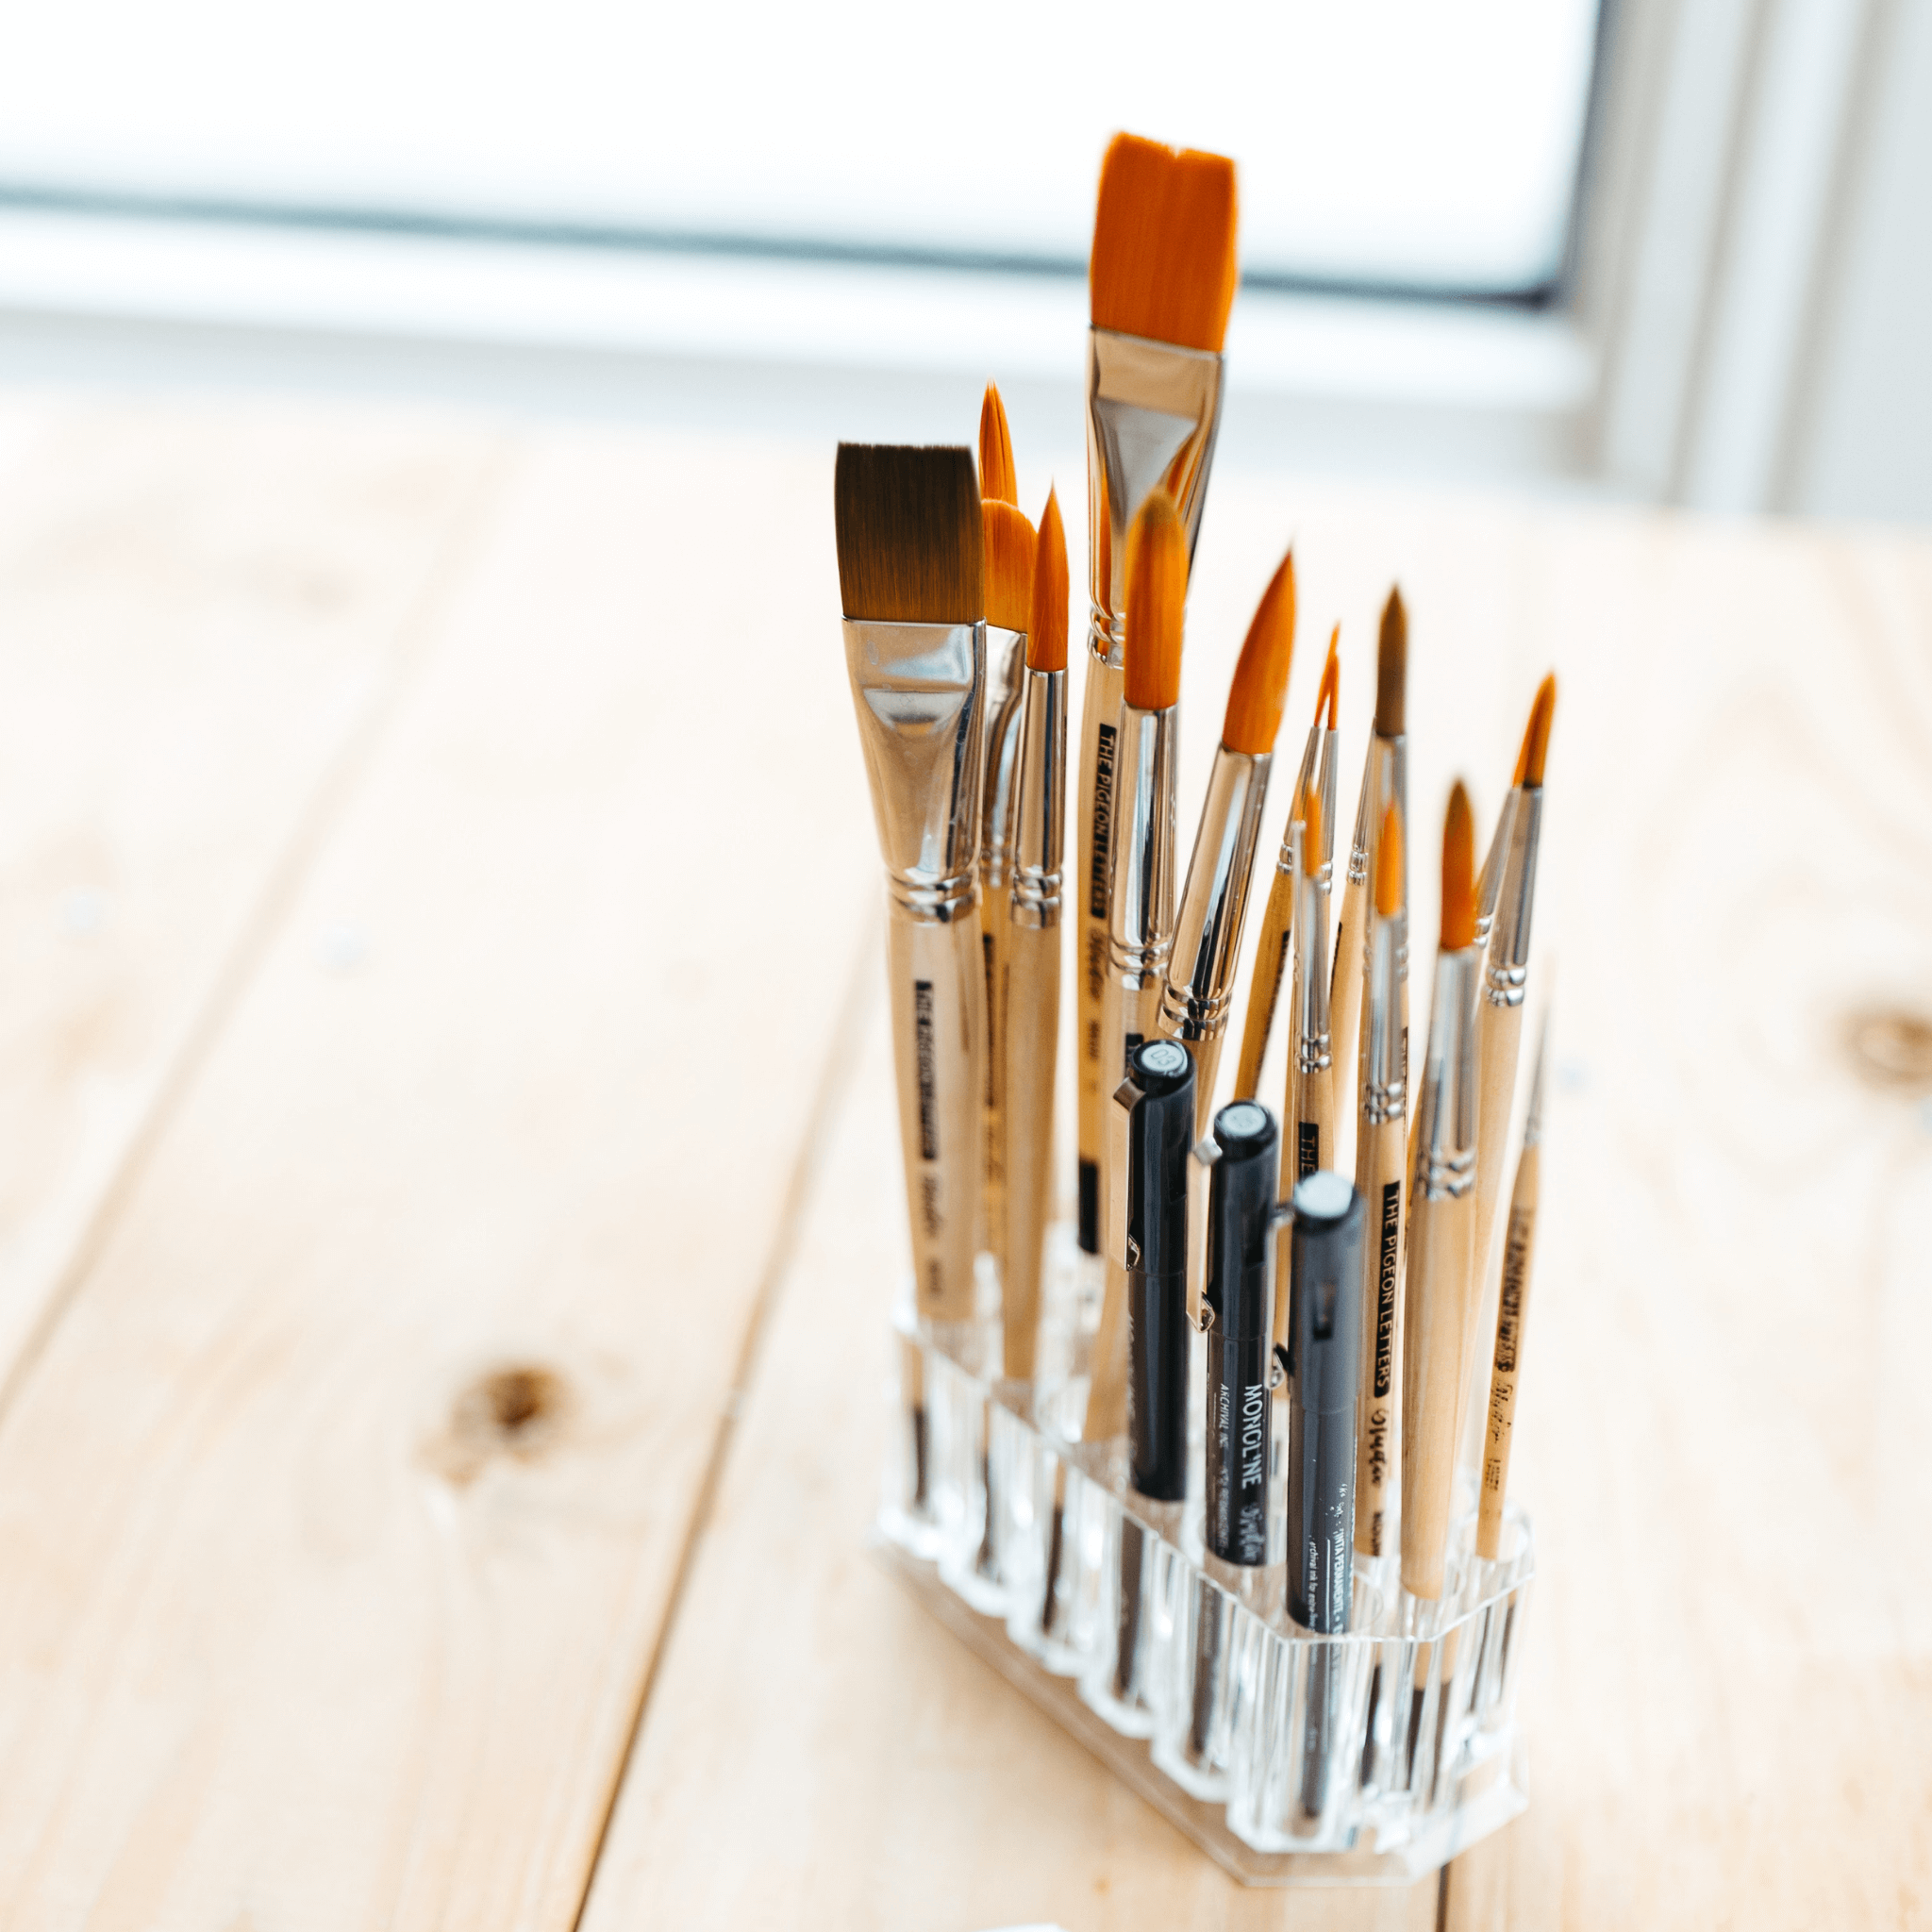 A collection of various cruelty-free art supplies